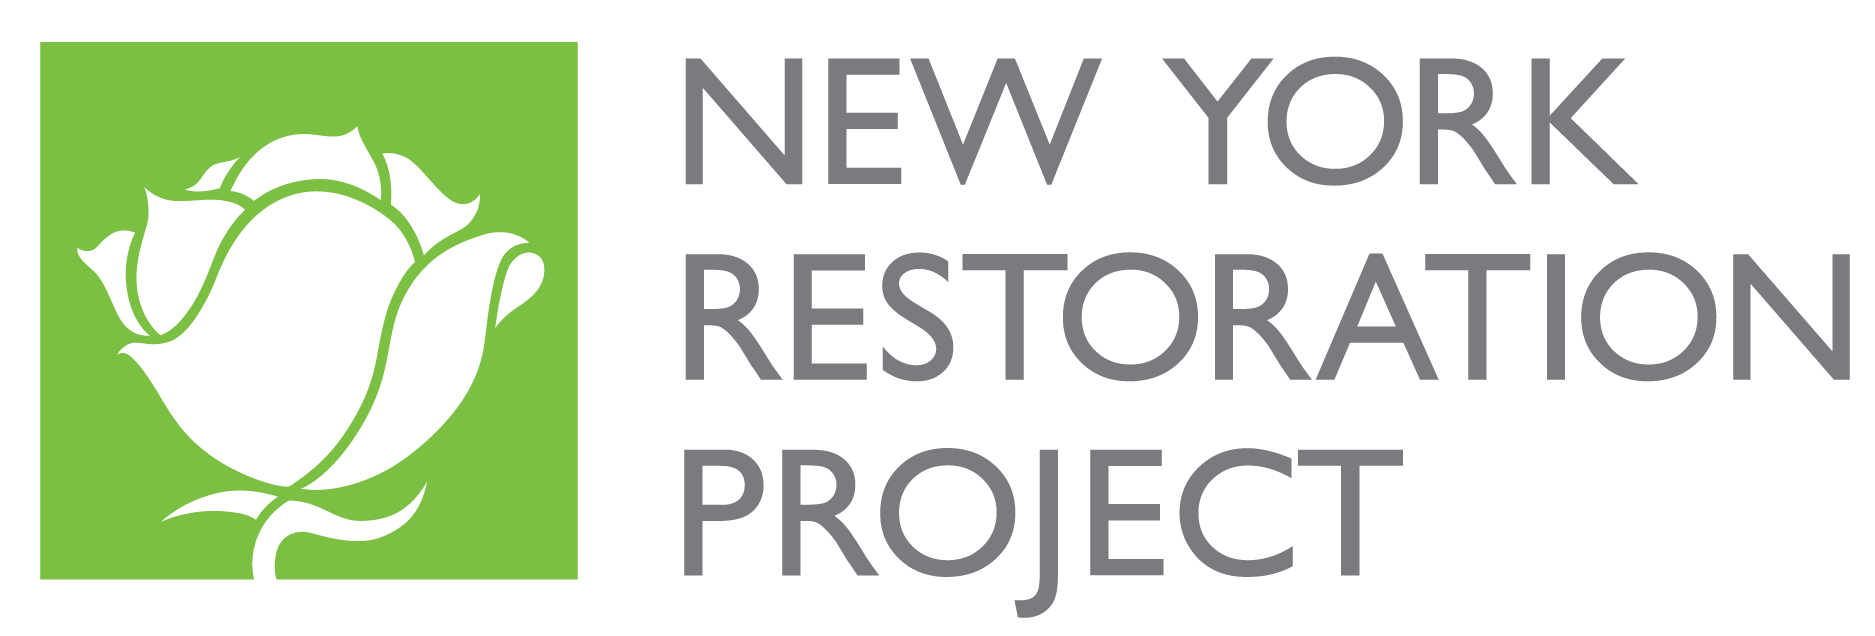 New York Restoration Project.png